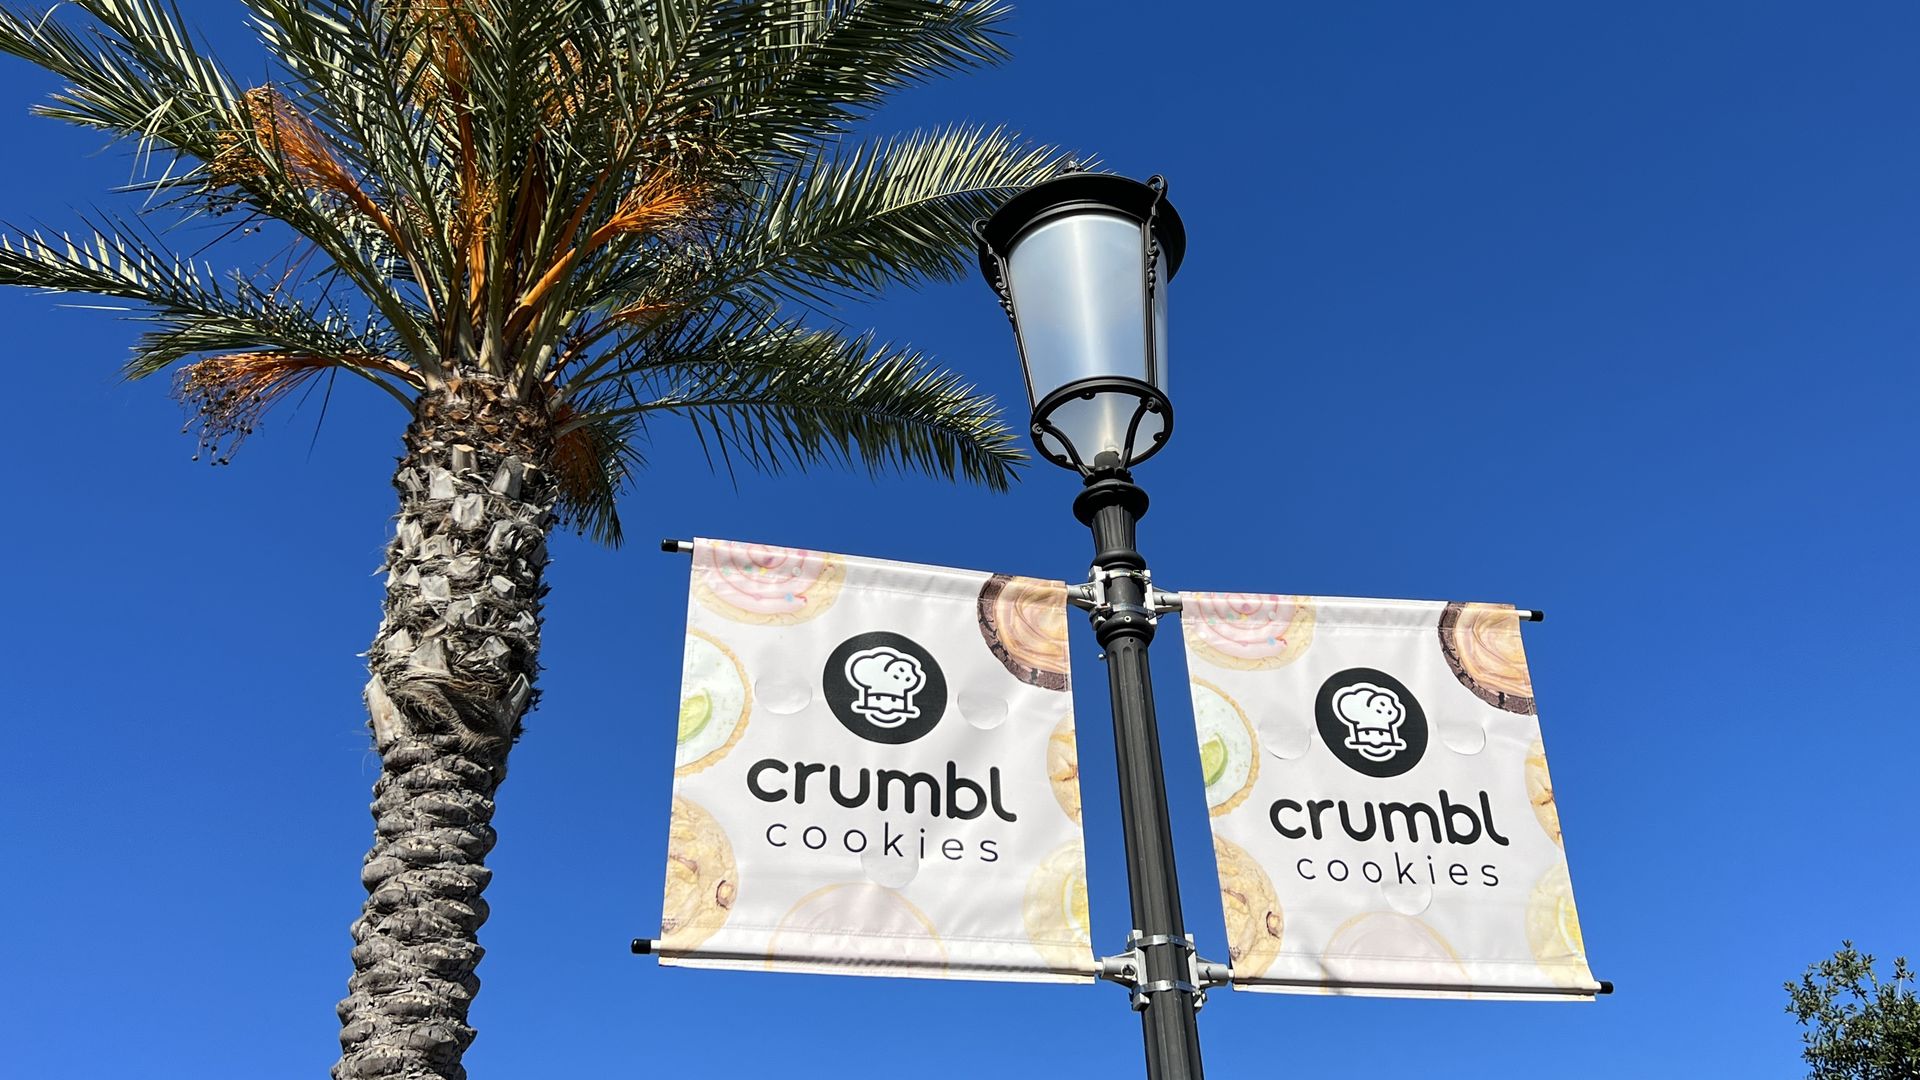 Signs for Crumbl cookies beside a palm tree at Veranda shopping center in Concord, California.